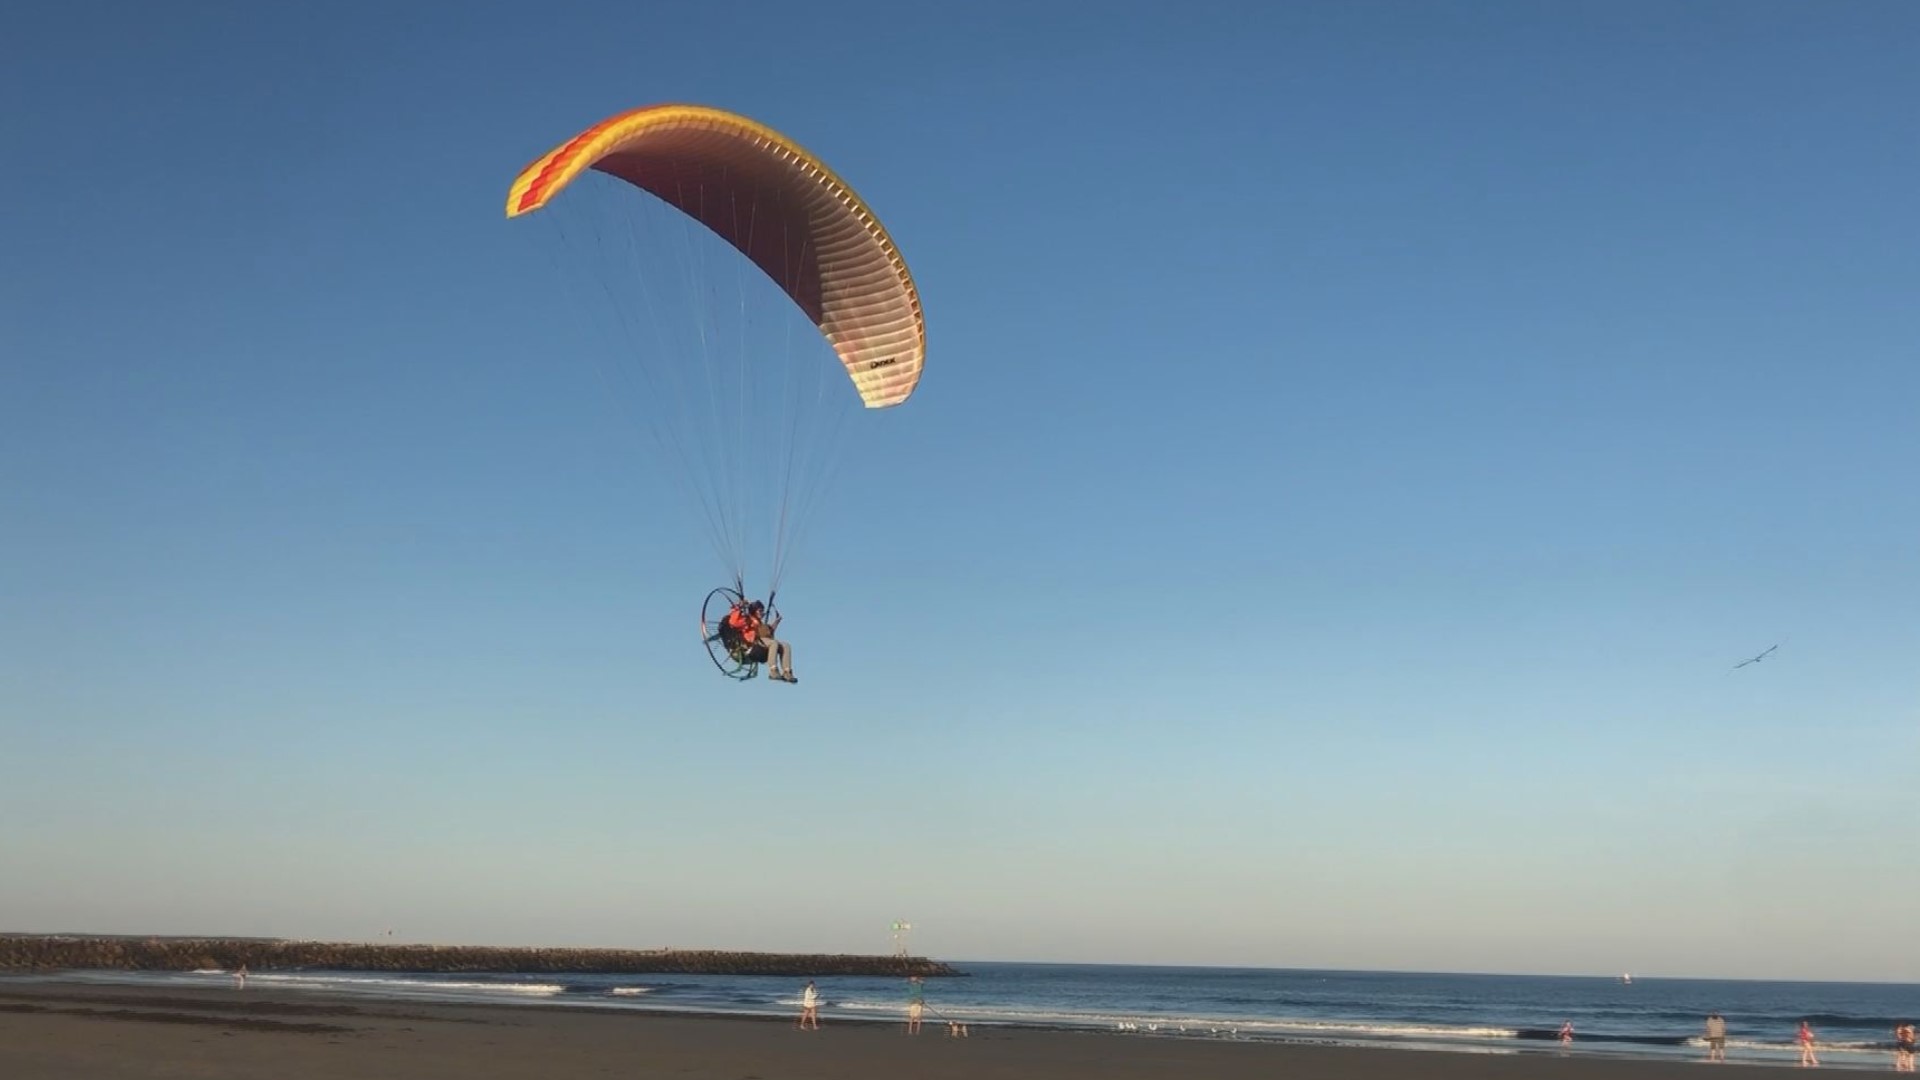 Powered paragliding in Maine gets a lift from YouTube ...